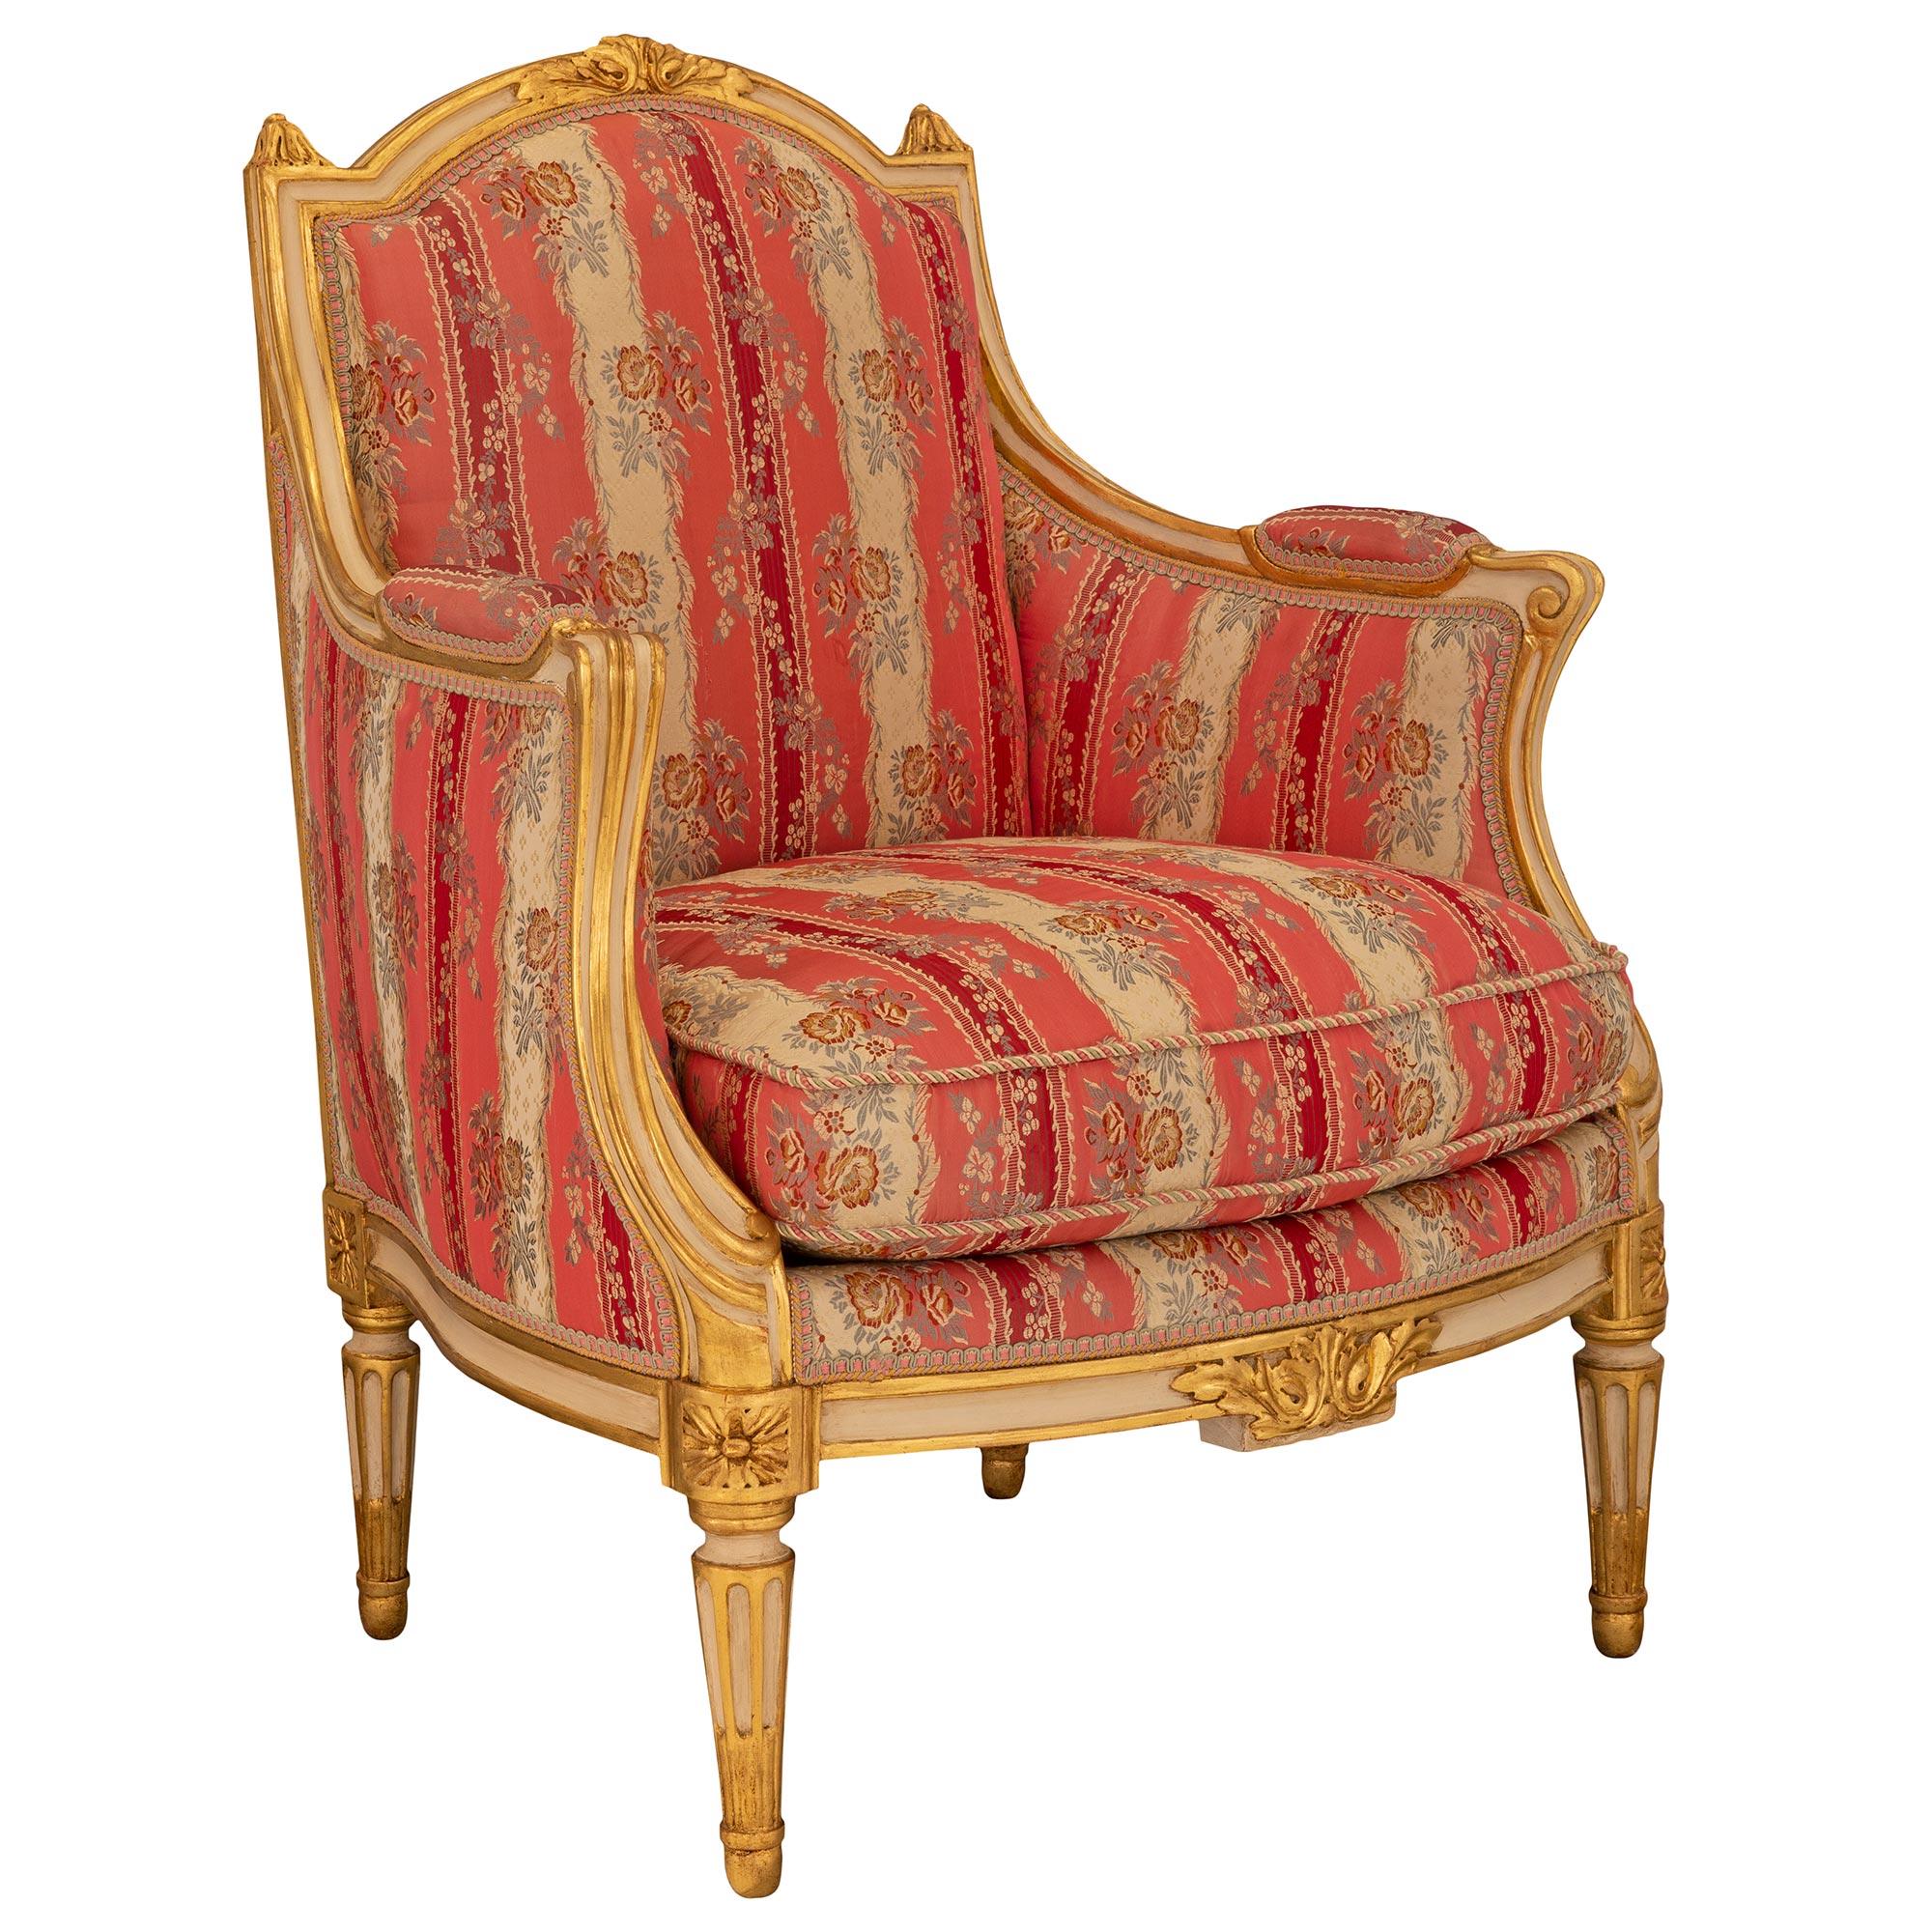 An exceptional and most elegant pair of French 19th century Louis XVI st. patinated and giltwood armchairs. Each armchair is raised by circular tapered fluted legs with fine mottled feet and richly carved corner block rosettes. The apron displays a